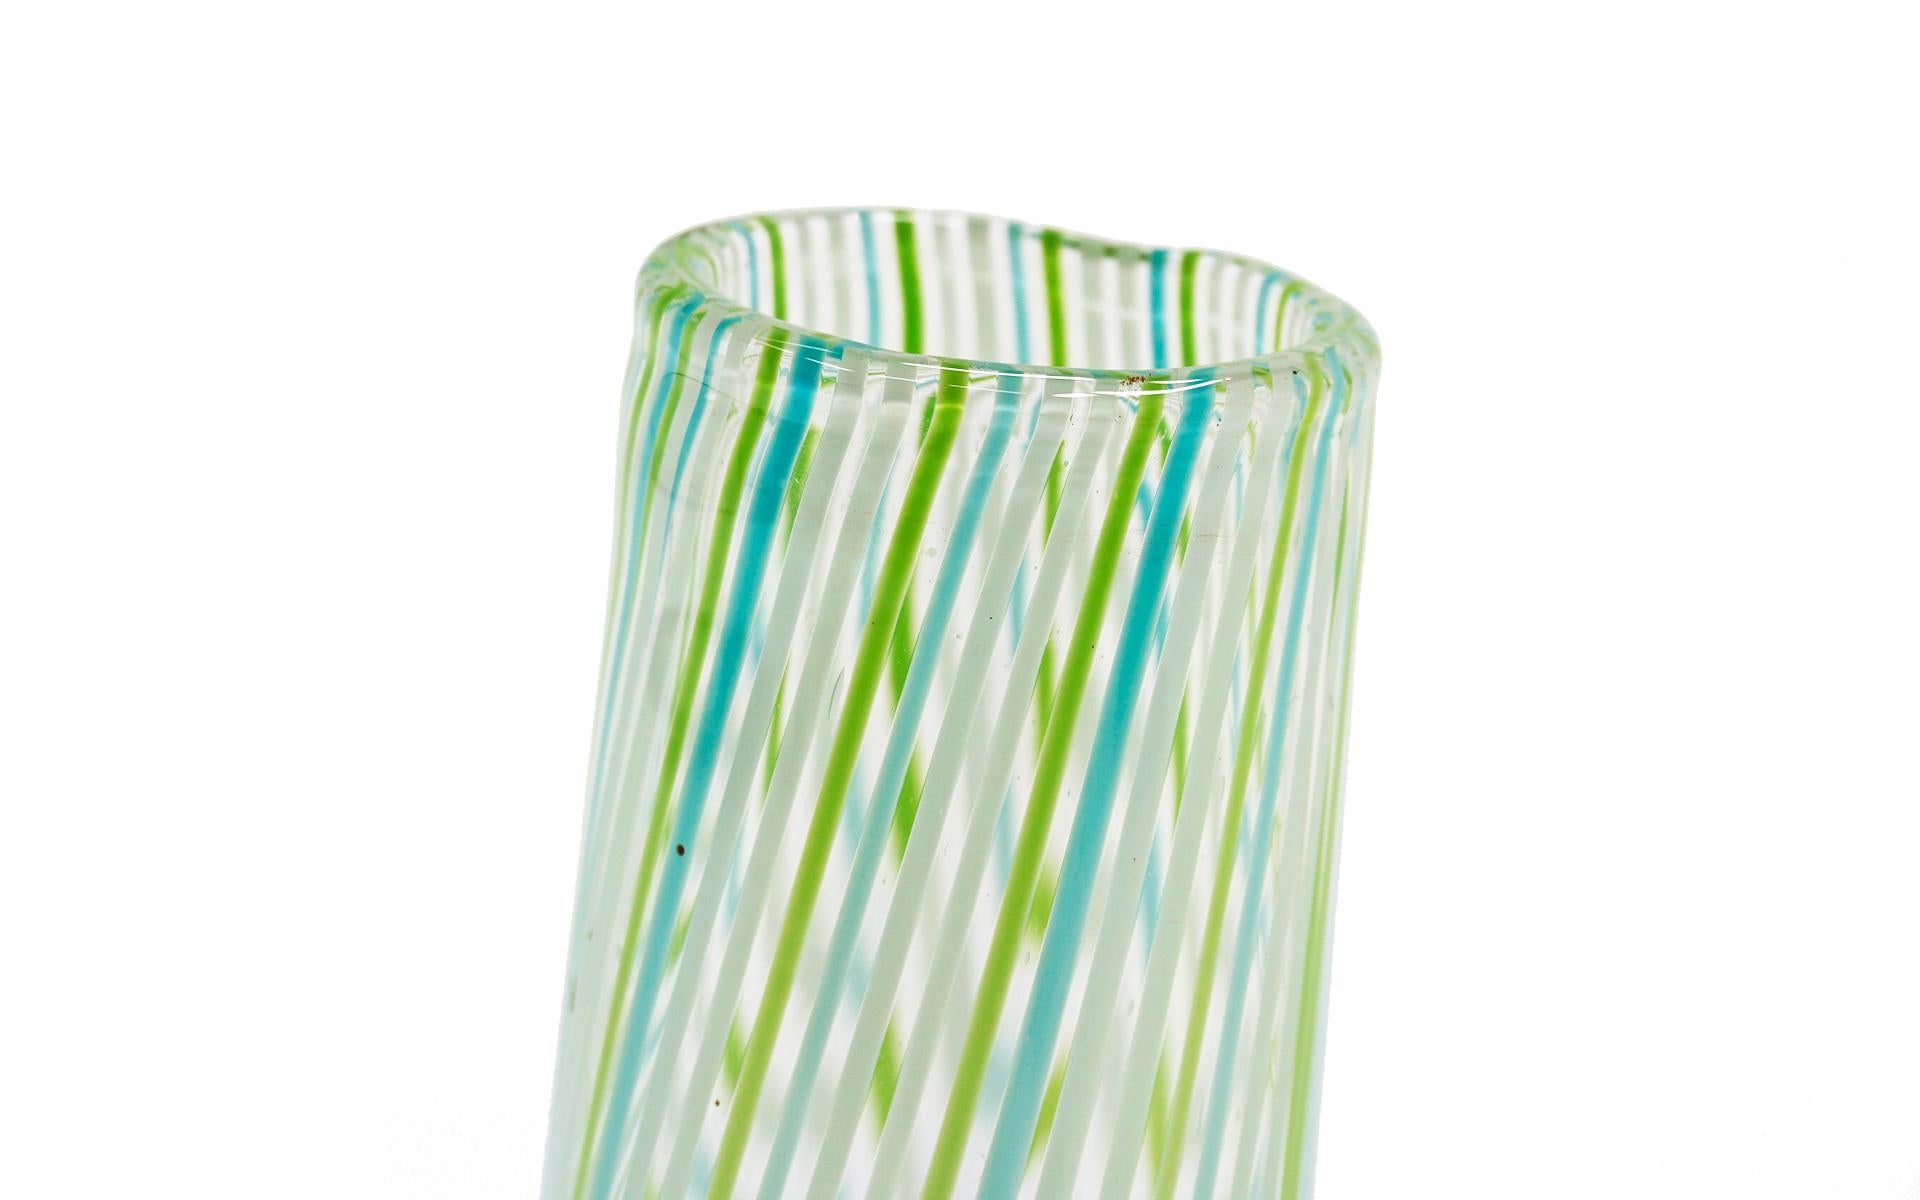 Art glass vase by Murano, Italy. Curved form with vertical stripes in green, blue, yellow, and white. Mint condition.